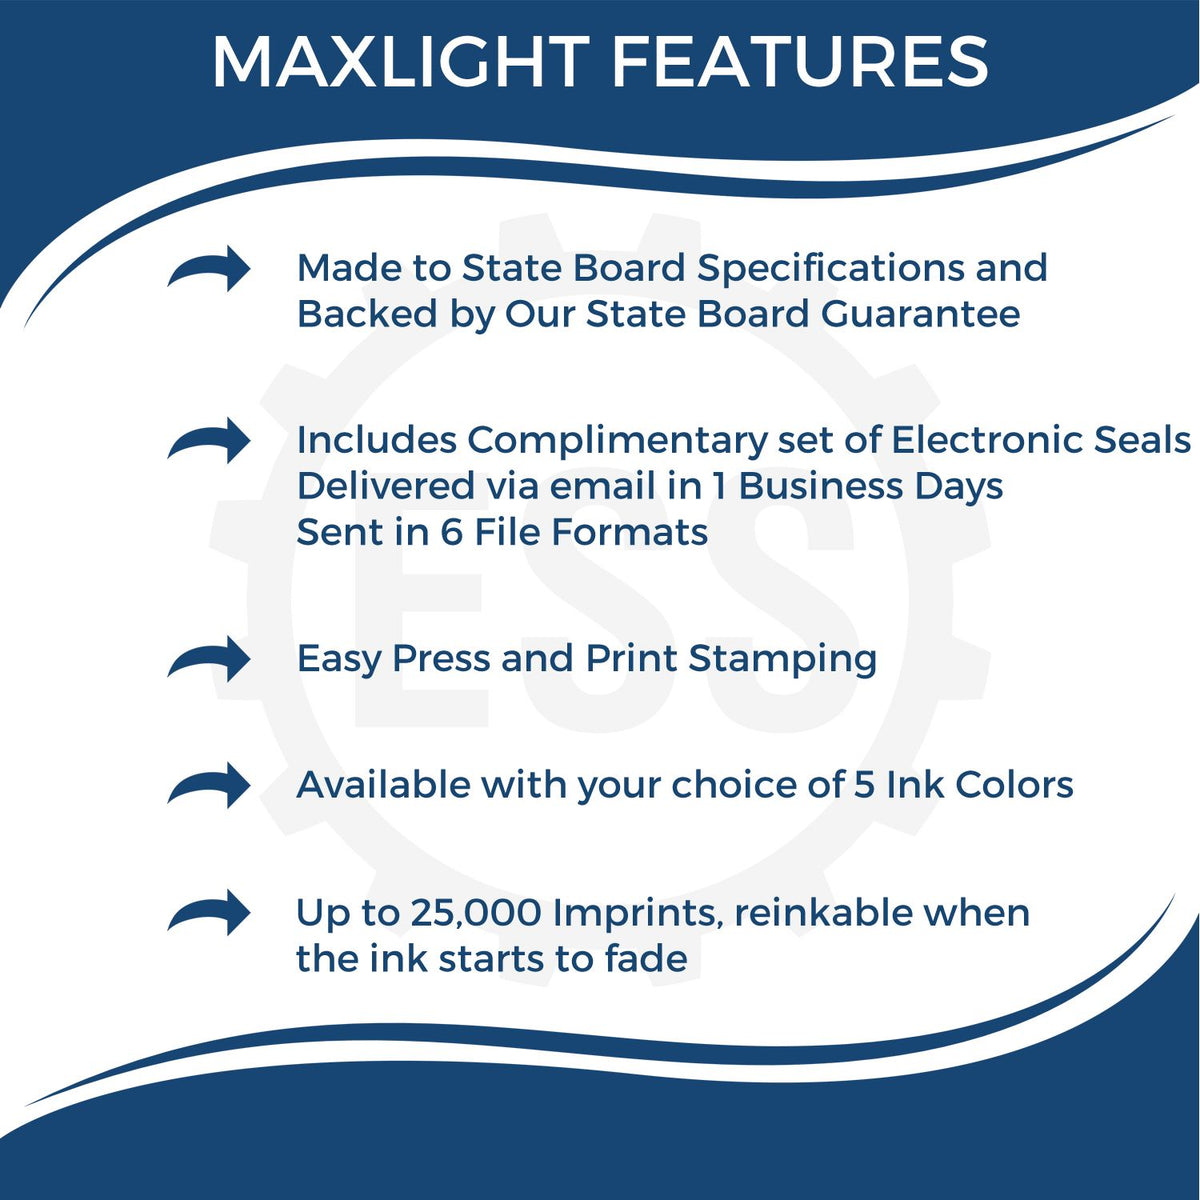 A picture of an infographic highlighting the selling points for the MaxLight Premium Pre-Inked Washington Rectangular Notarial Stamp